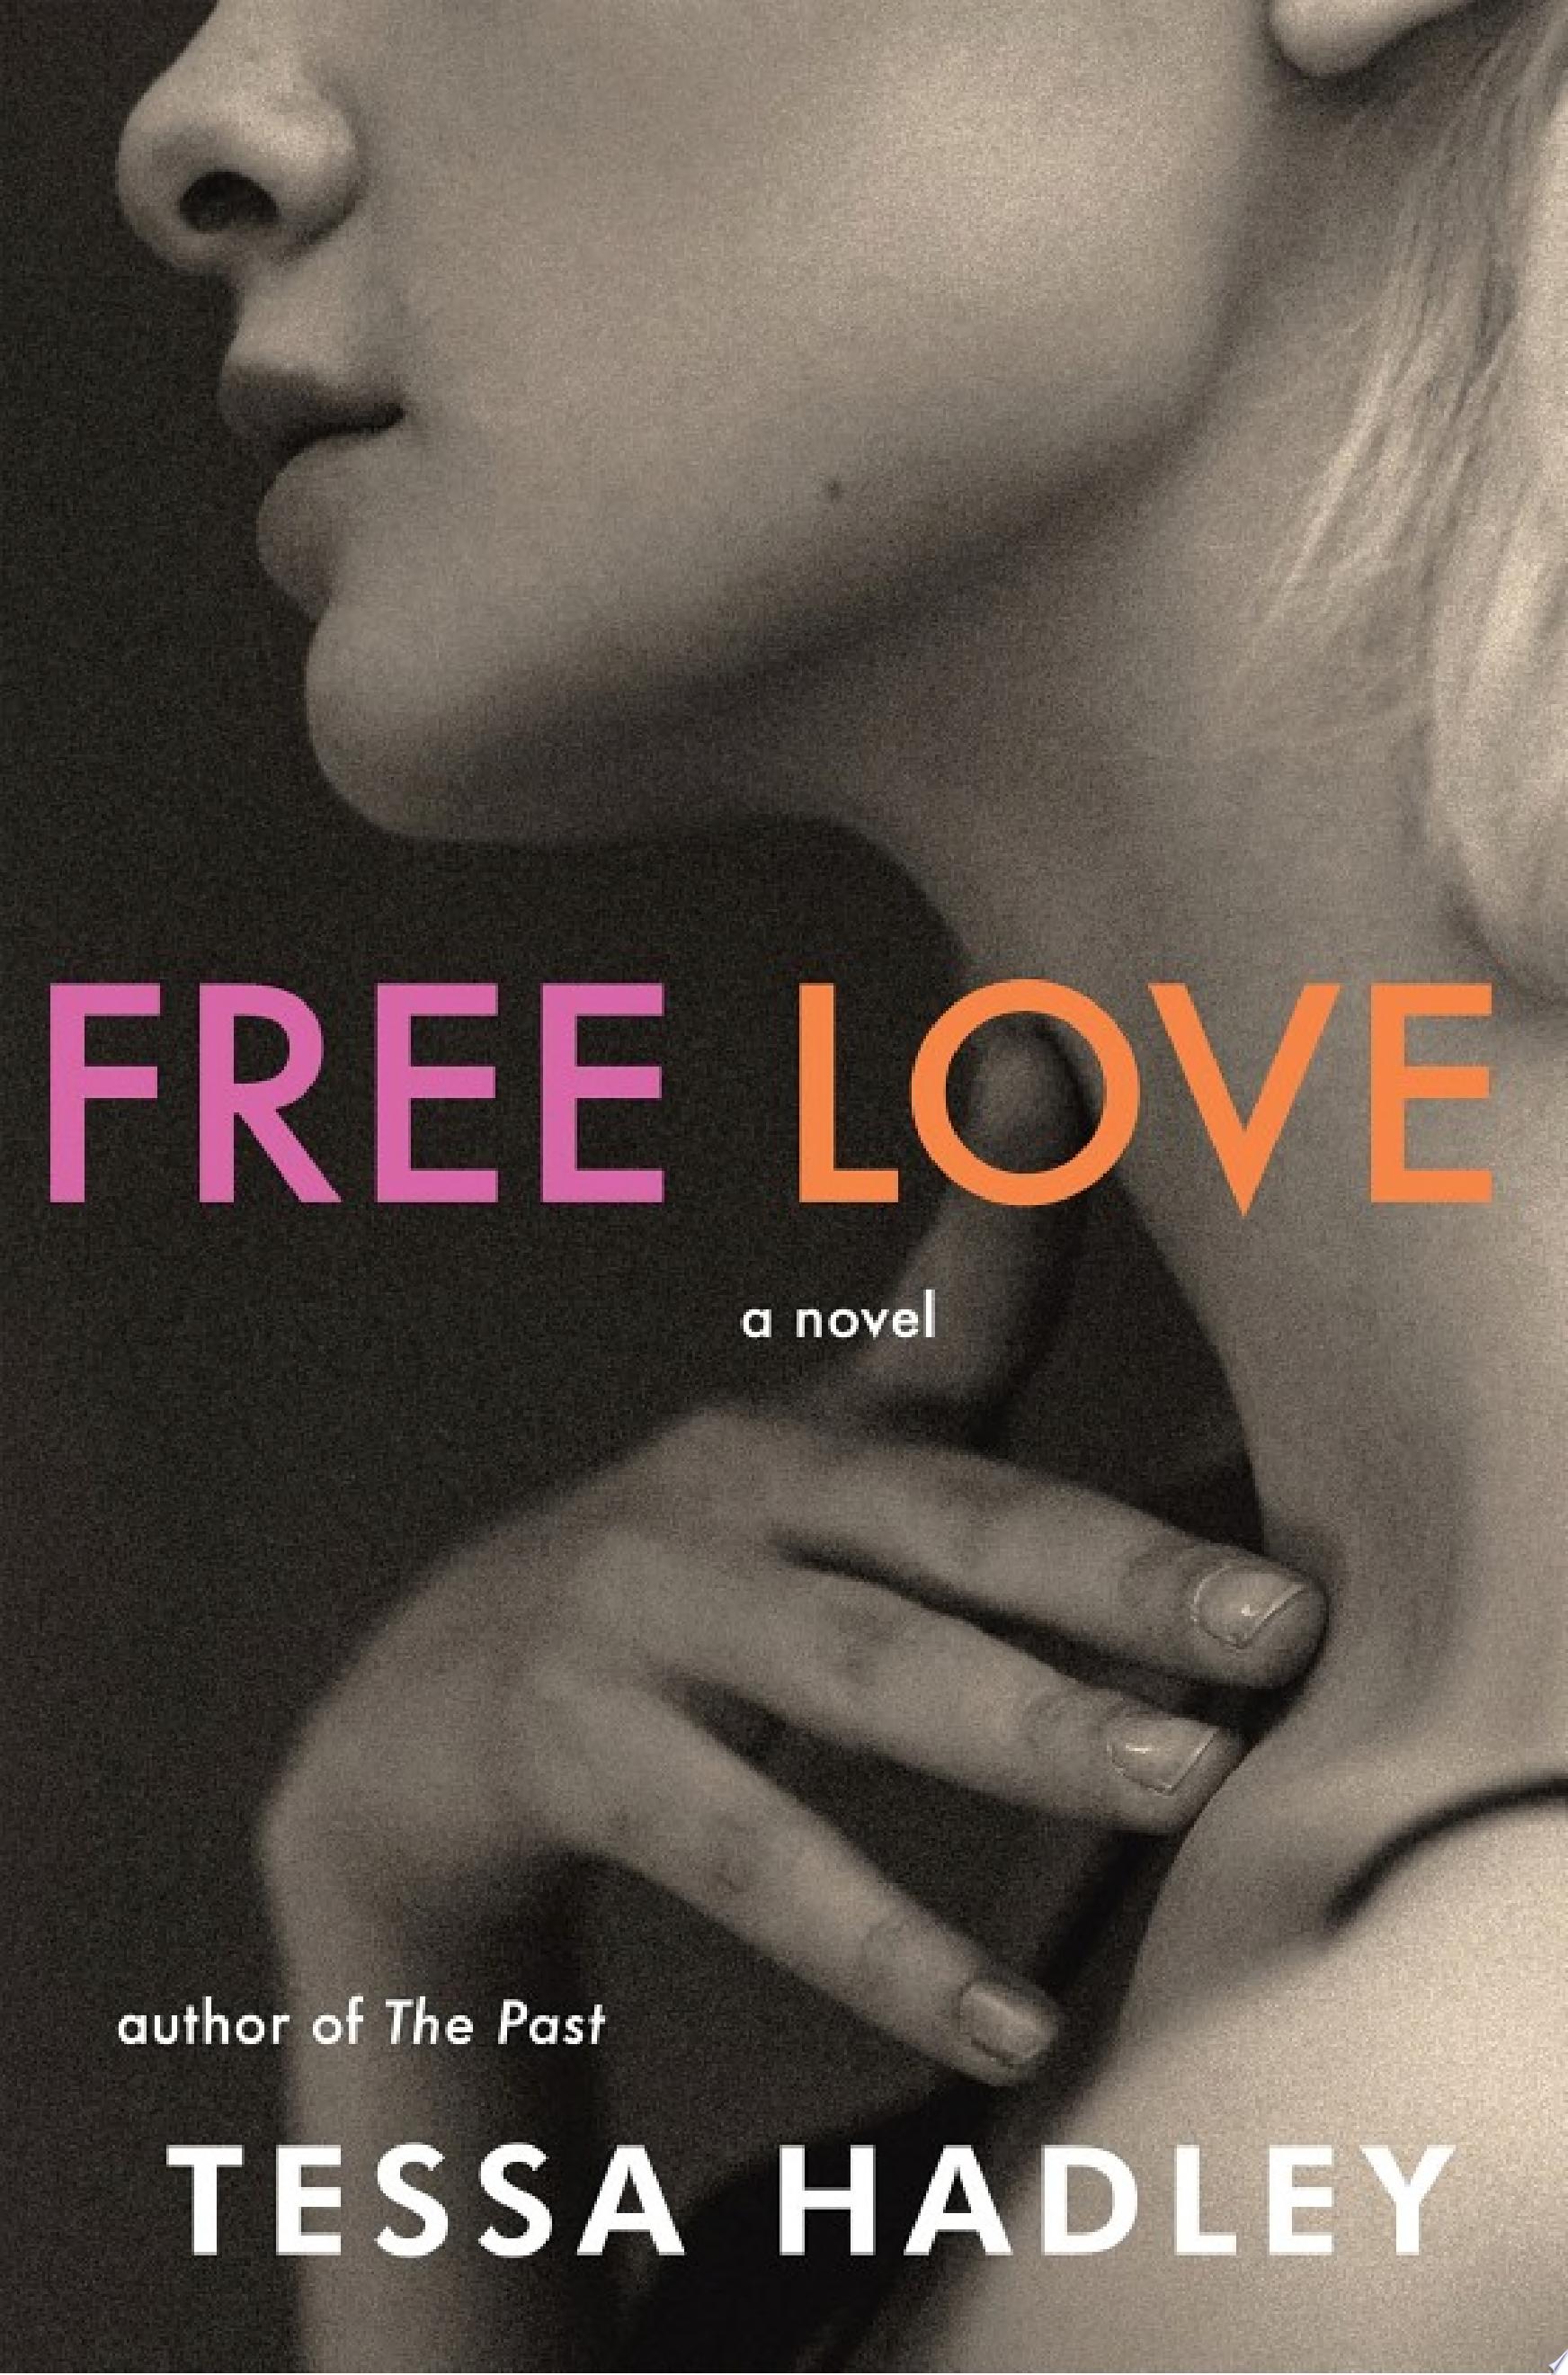 Image for "Free Love"